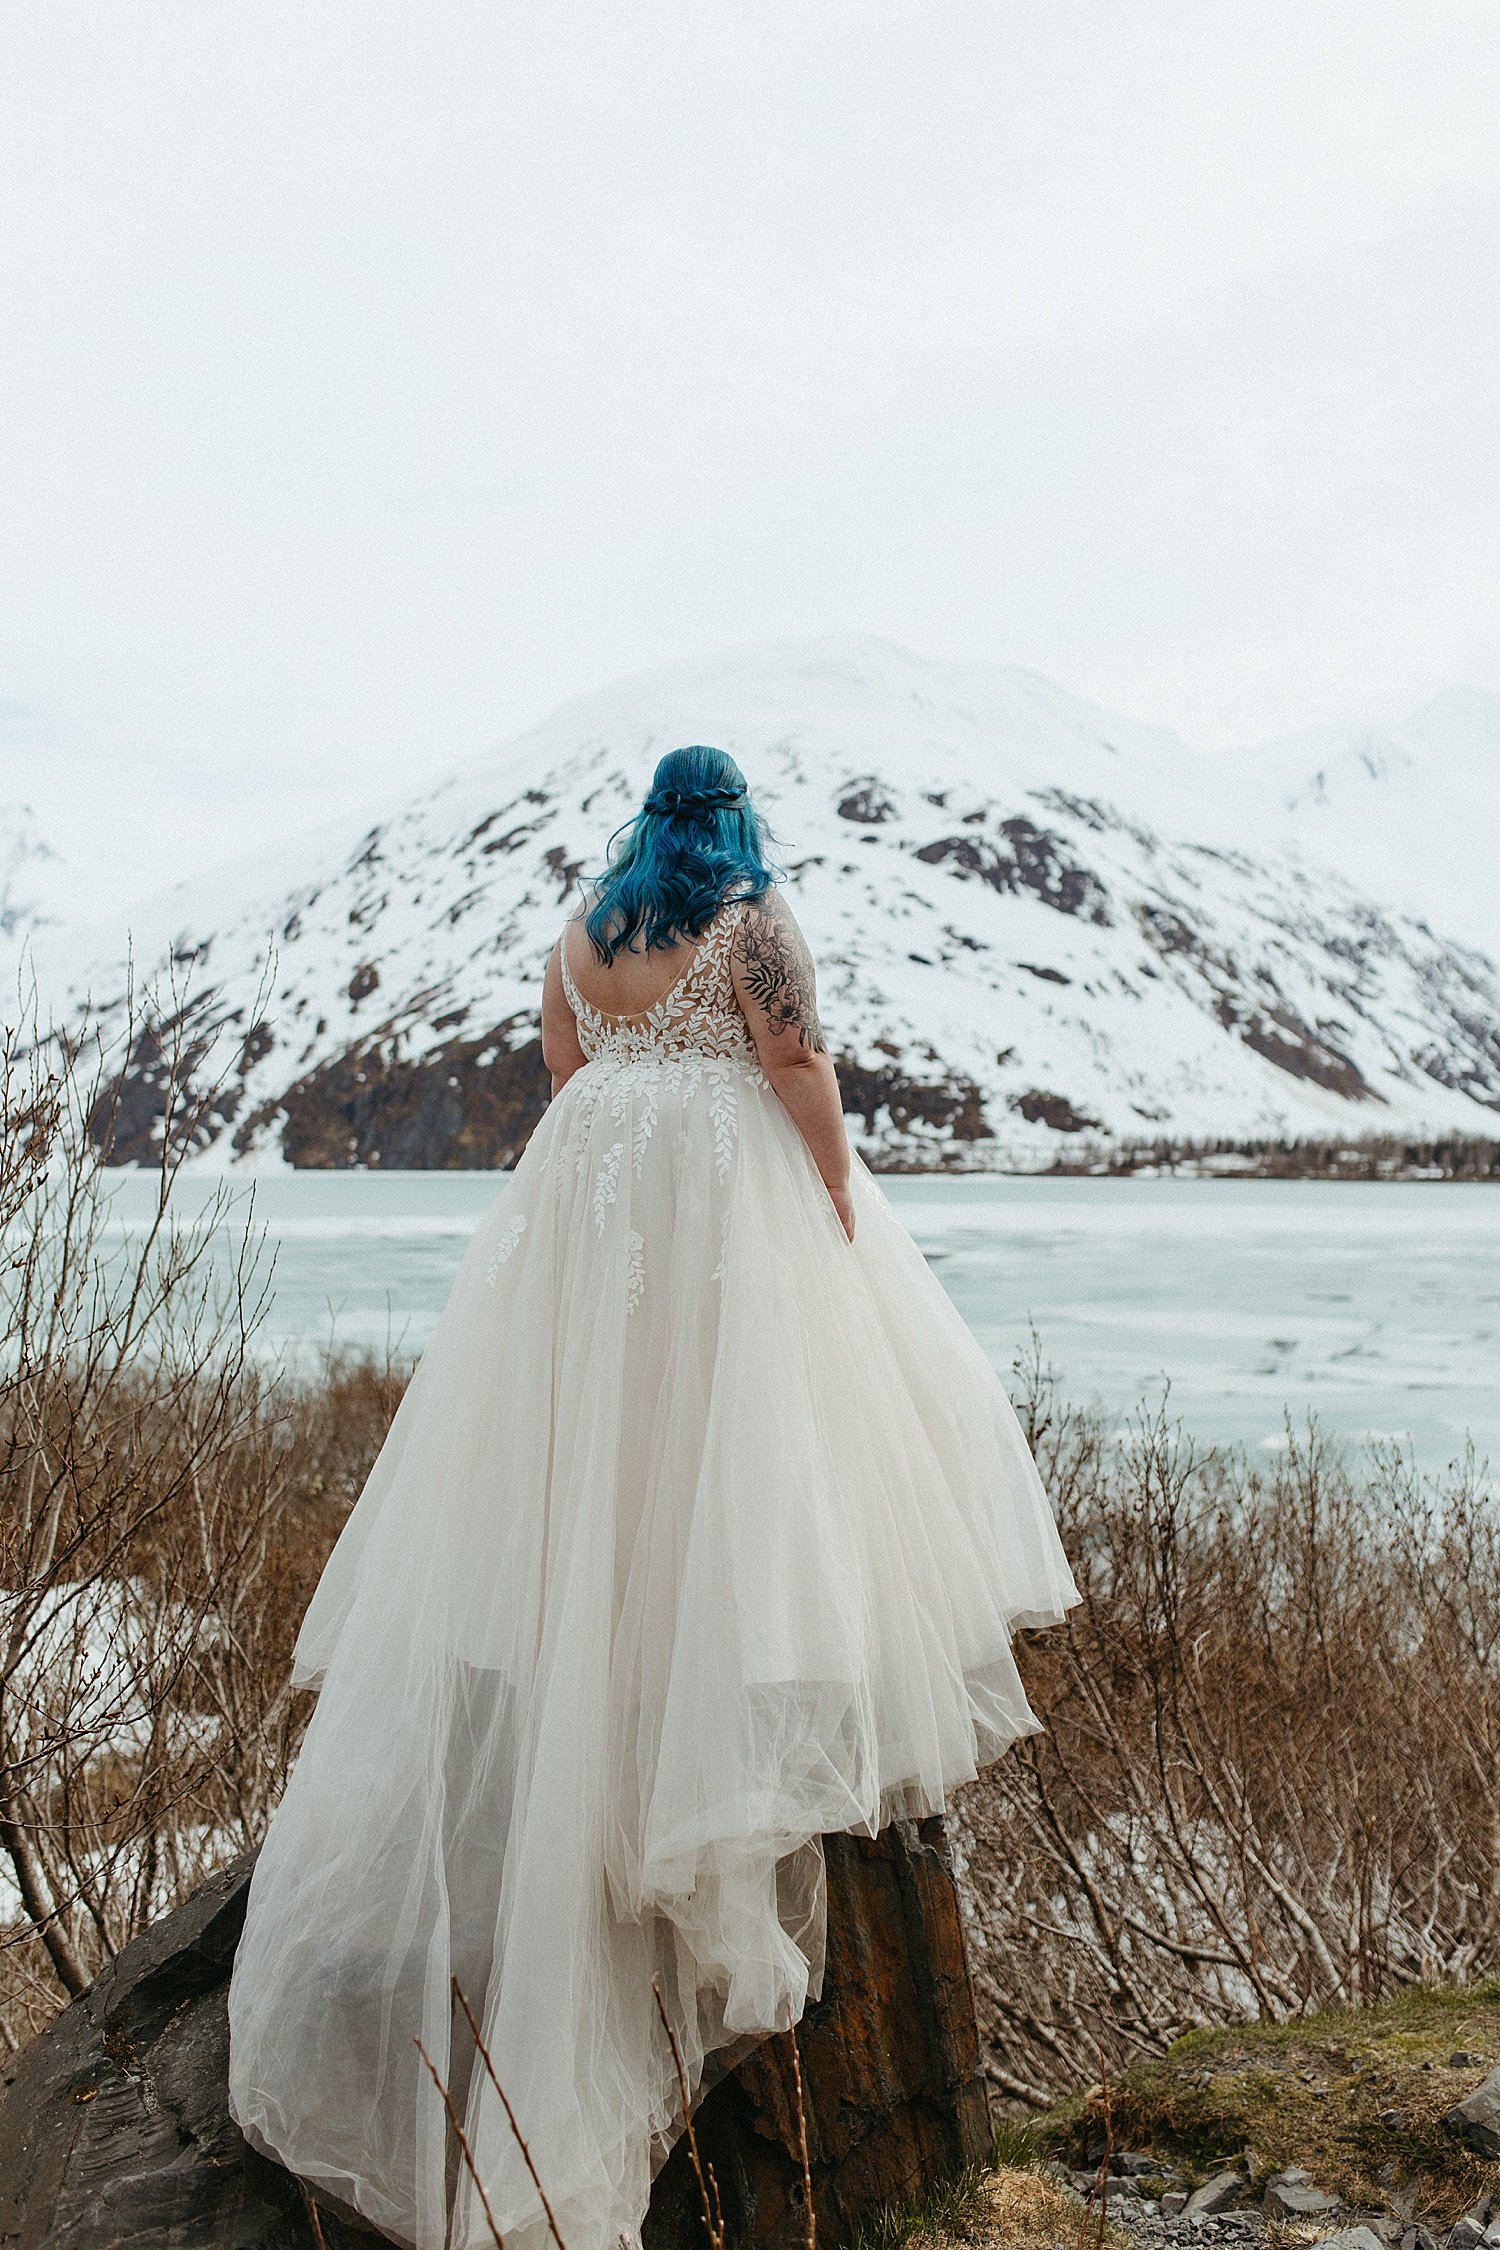  Bride standing on stump overlooking the mountains by Rachel Struve Photography 